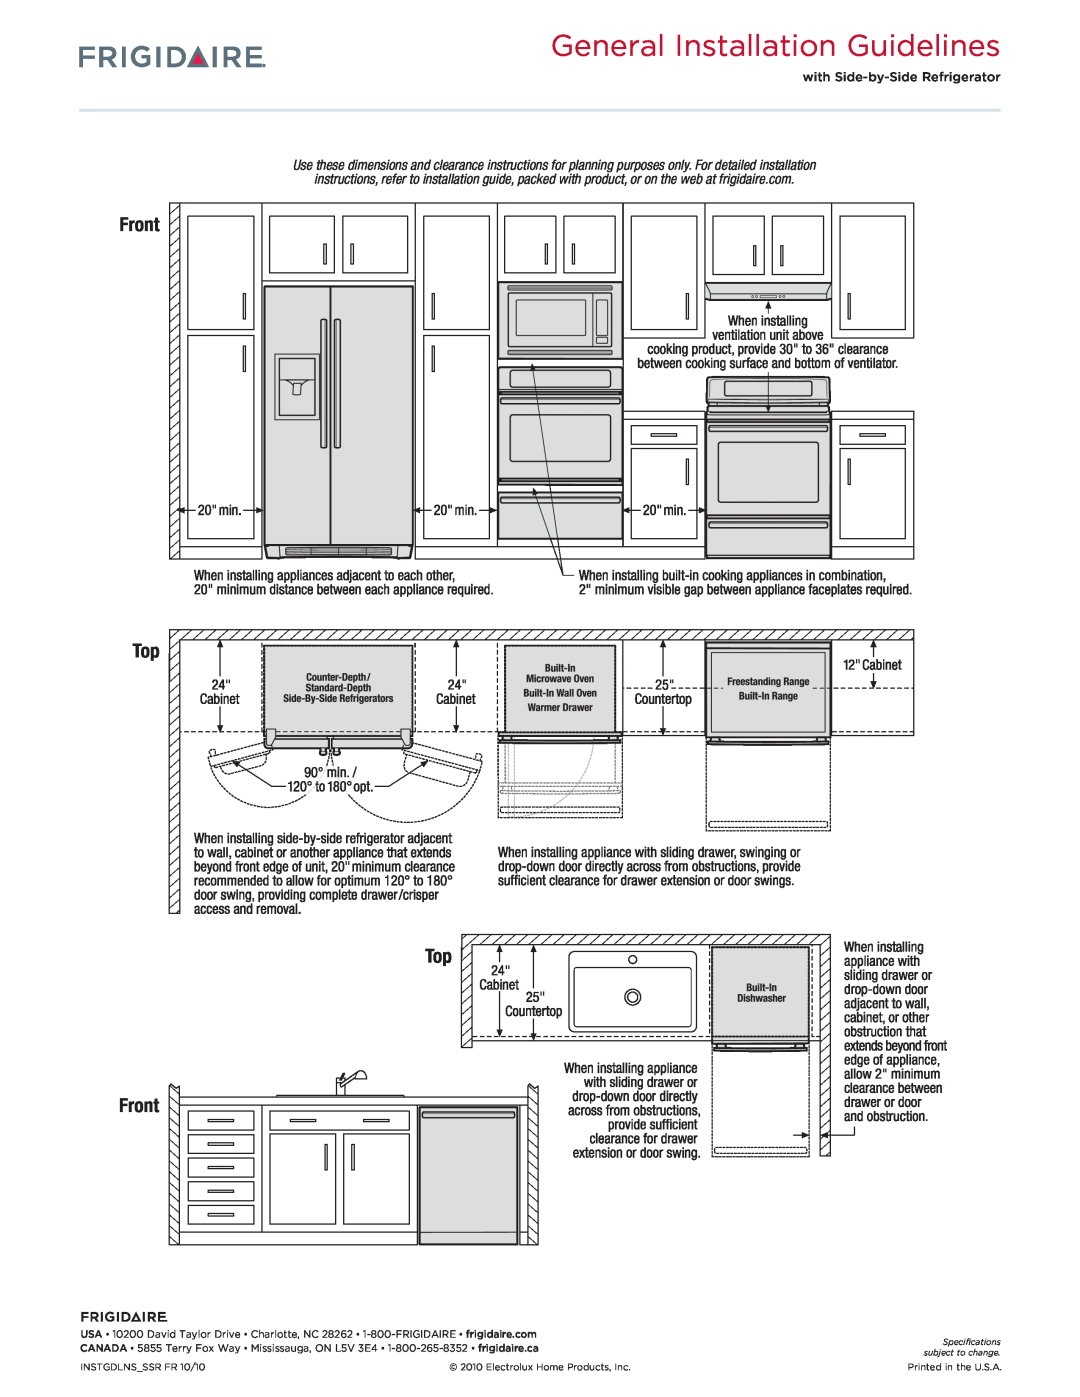 Frigidaire FGEF3077K W/B dimensions General Installation Guidelines, Top Front 